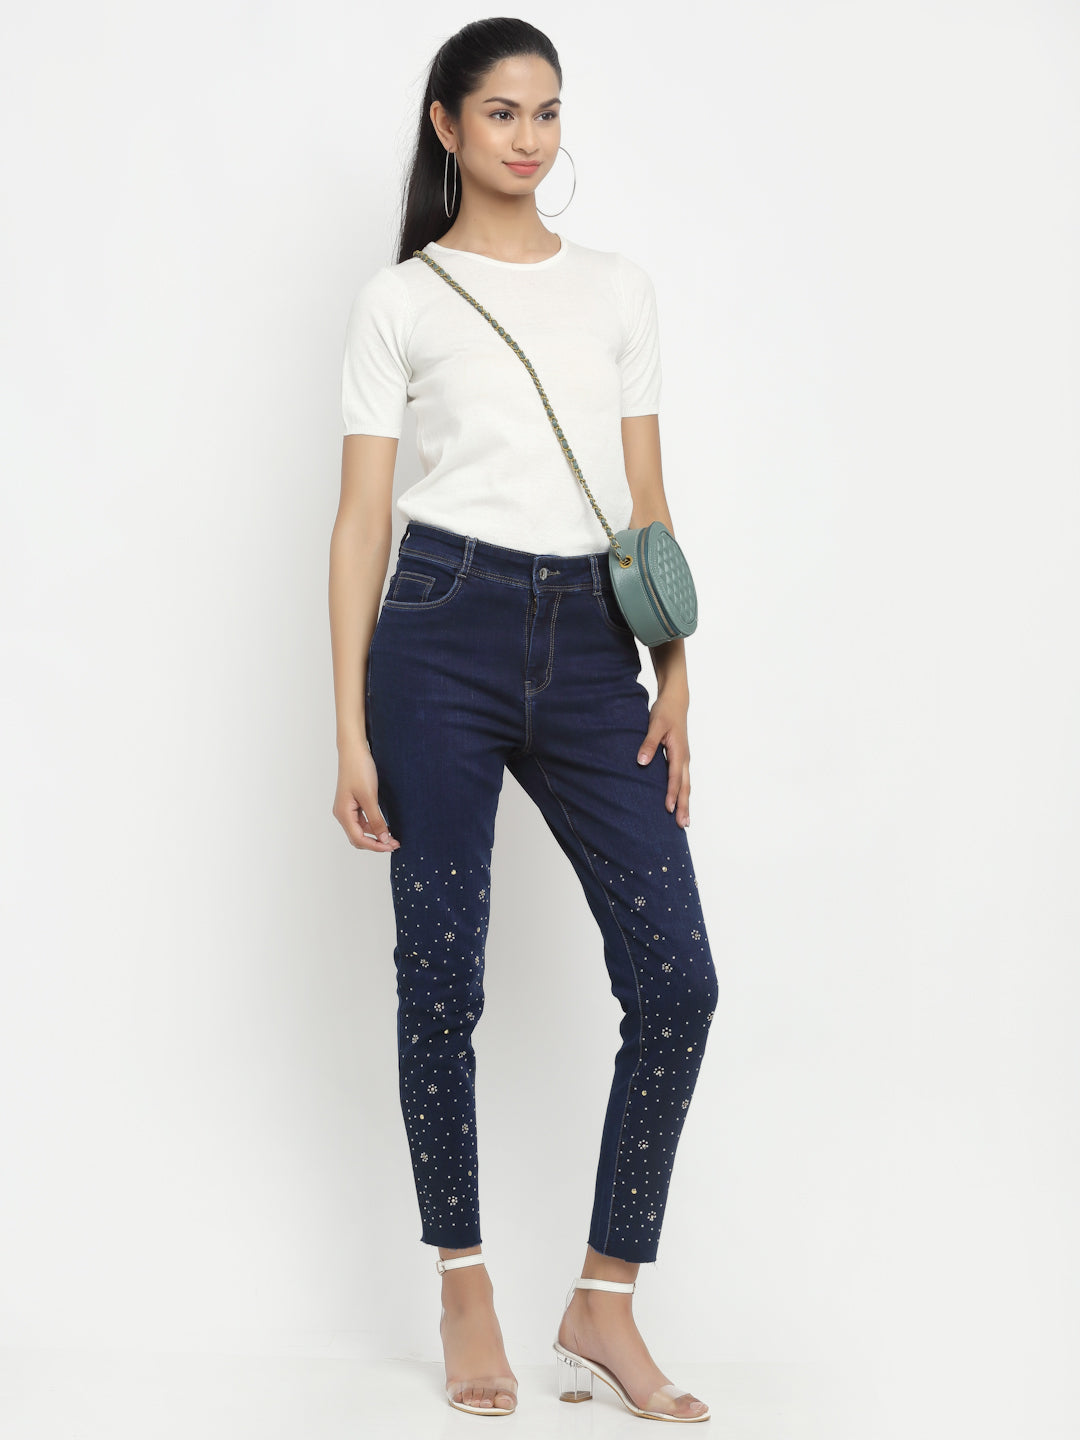 women straight fit dark blue embroidered jeans